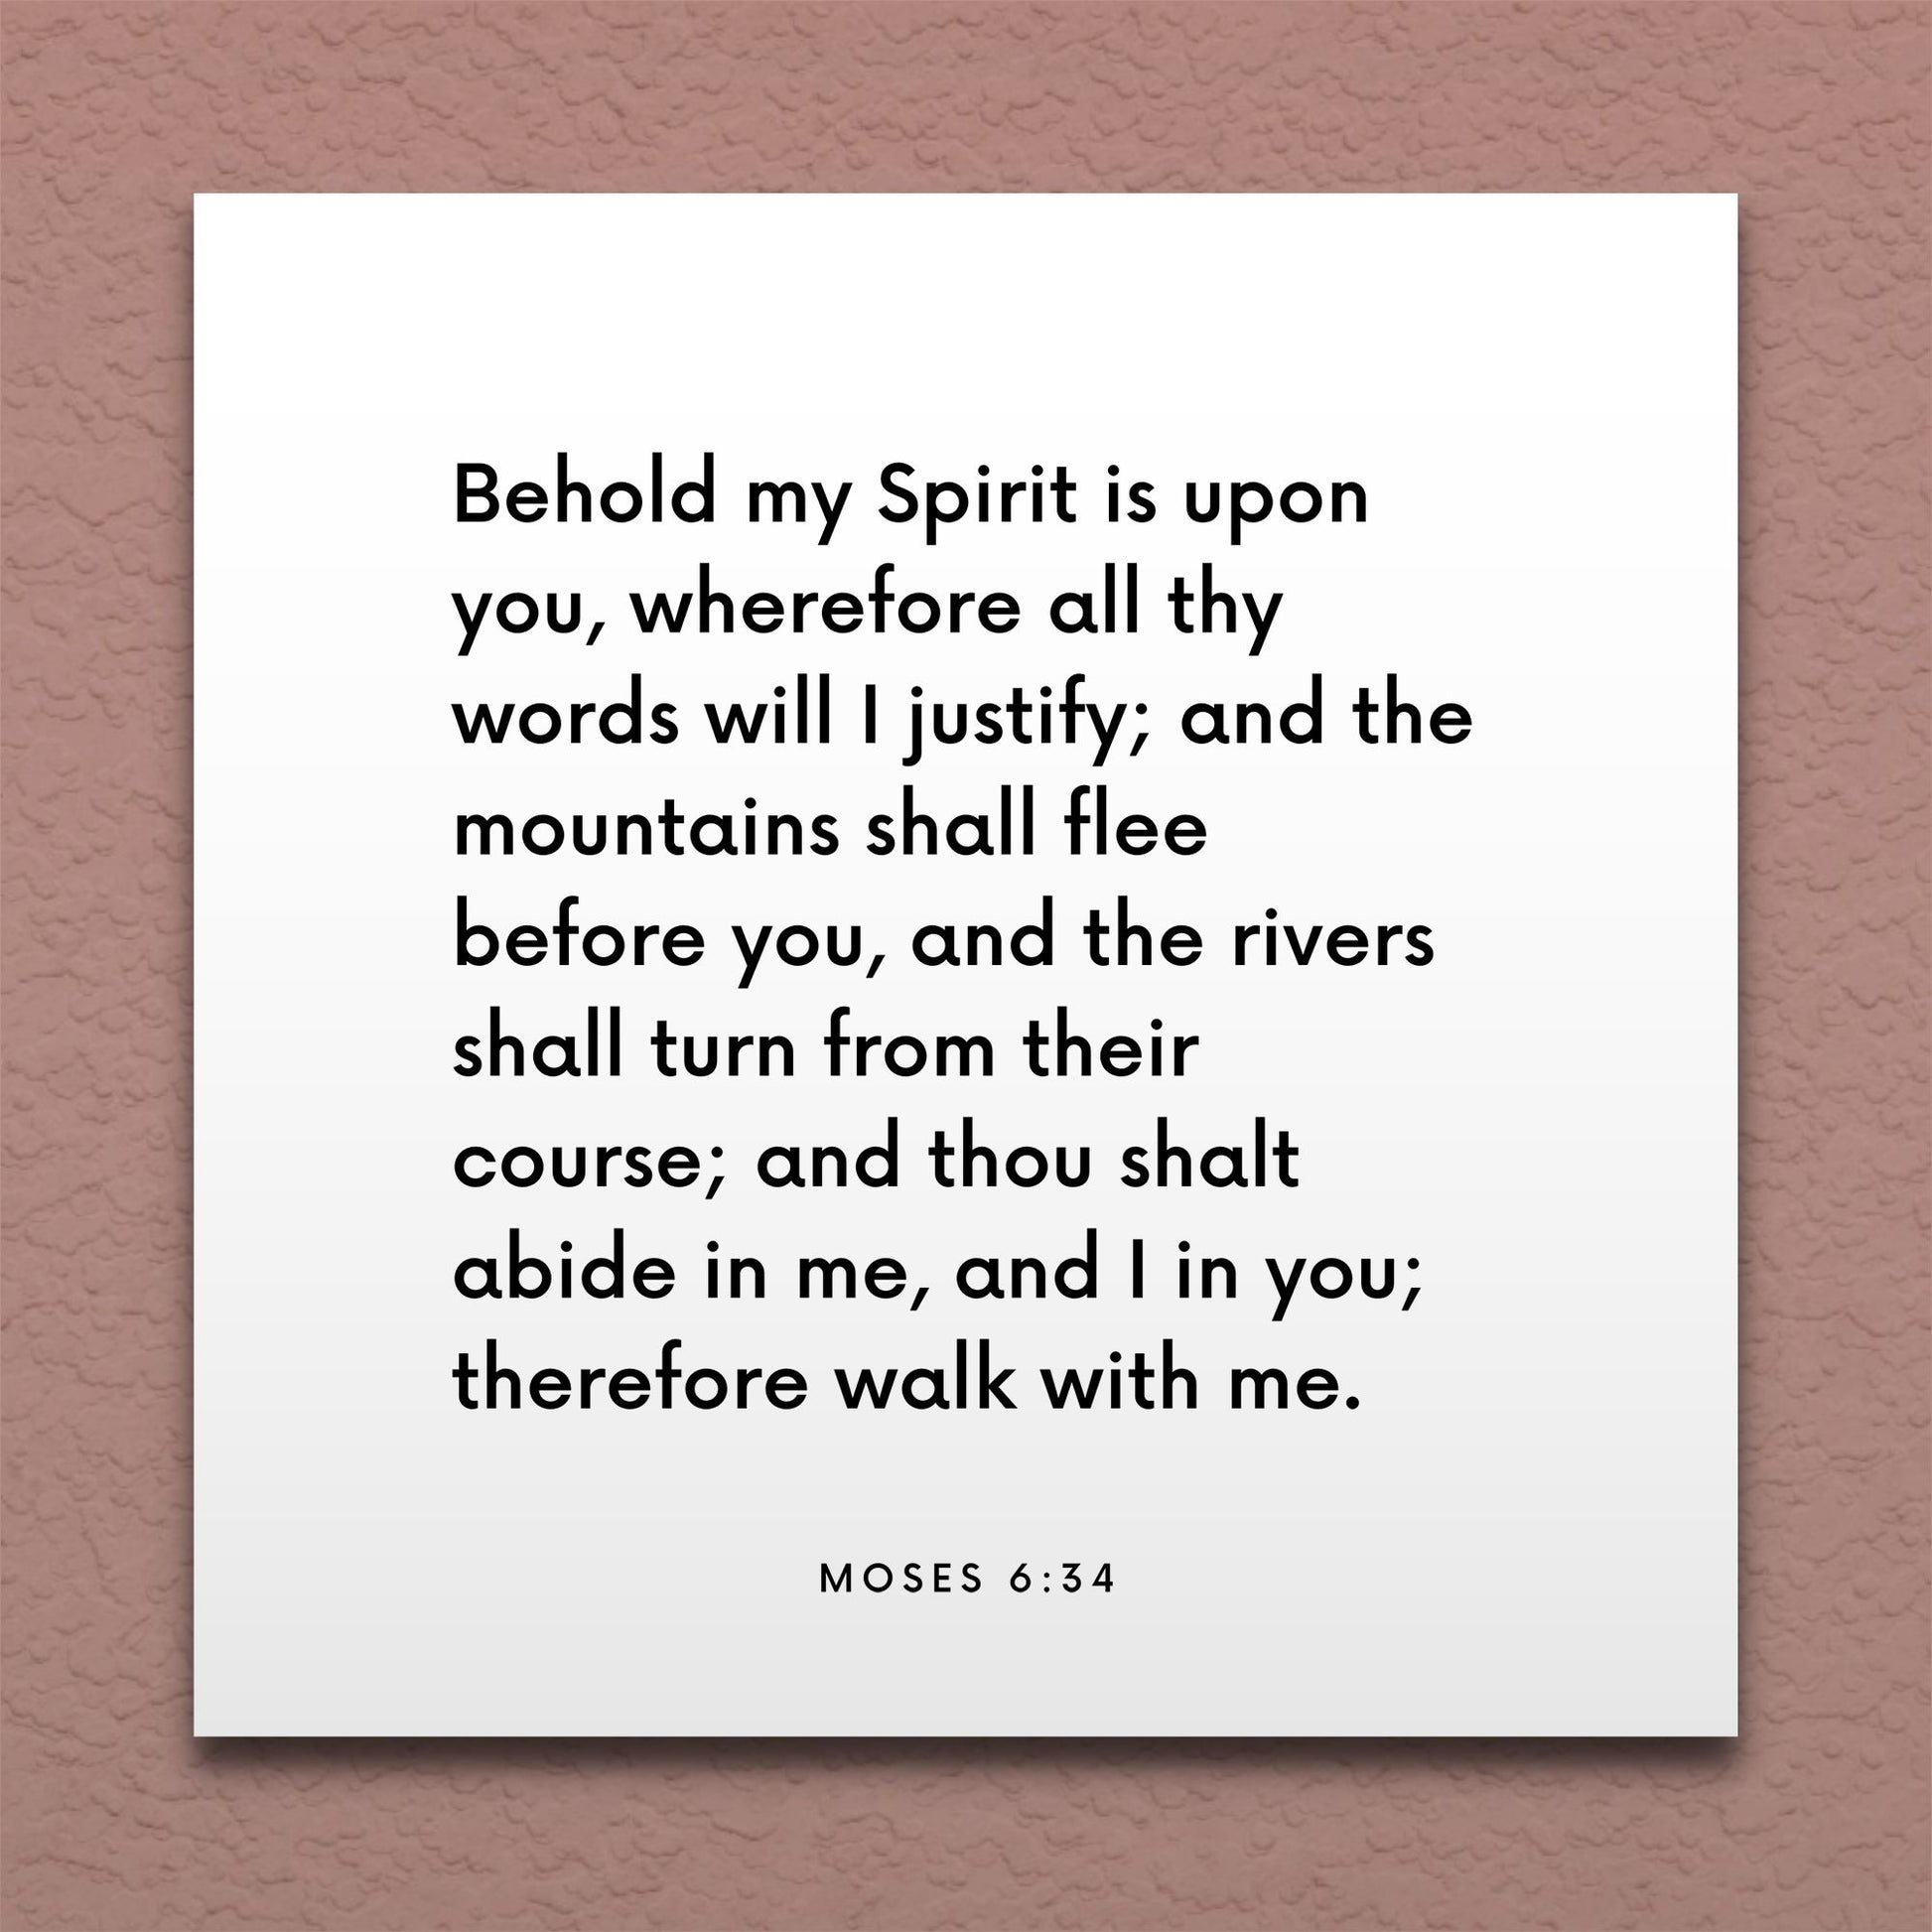 Wall-mounted scripture tile for Moses 6:34 - "Thou shalt abide in me, and I in you"